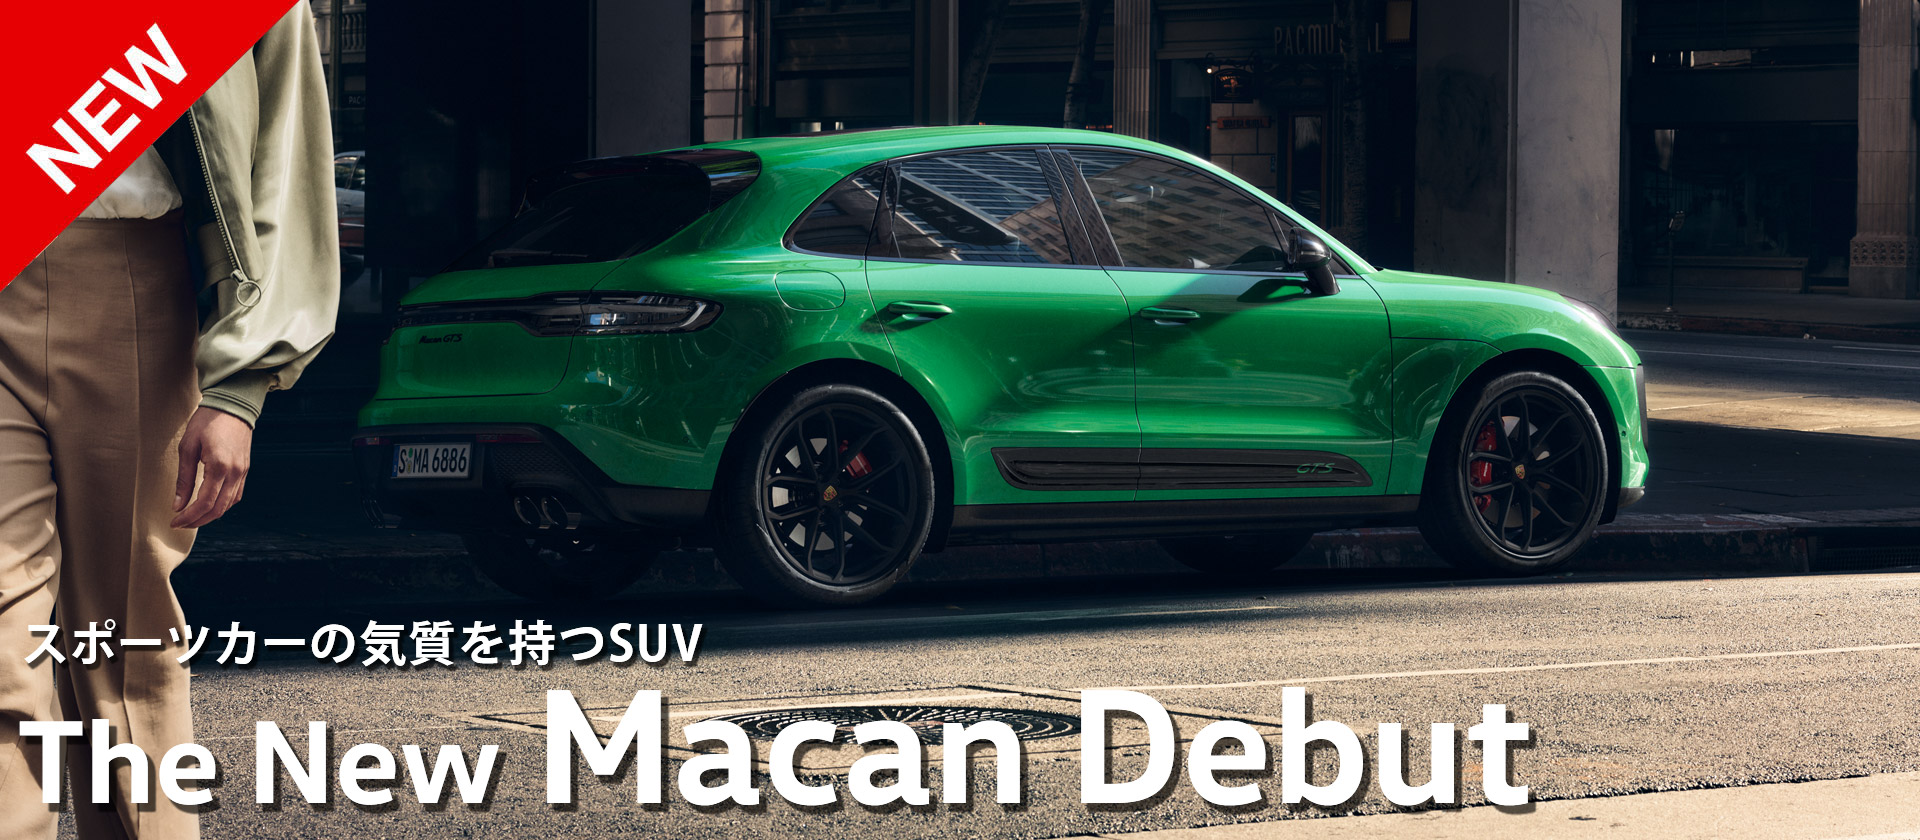 The New macan Debut